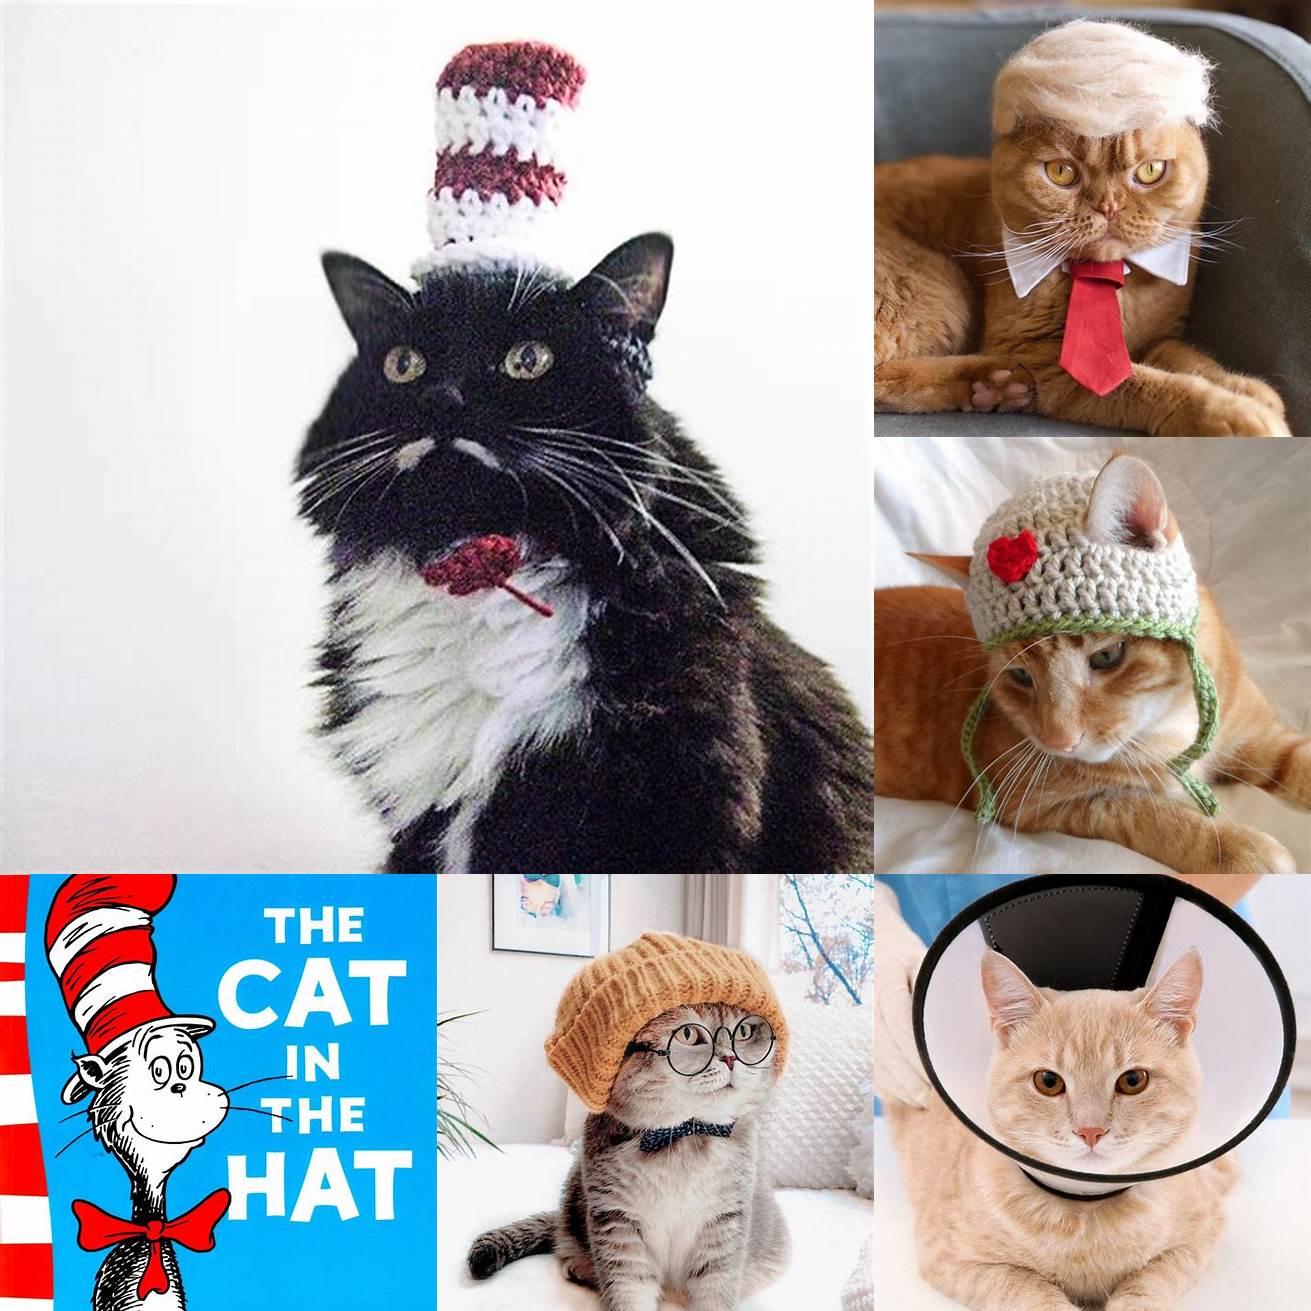 Get Your Cat Used to the Hat